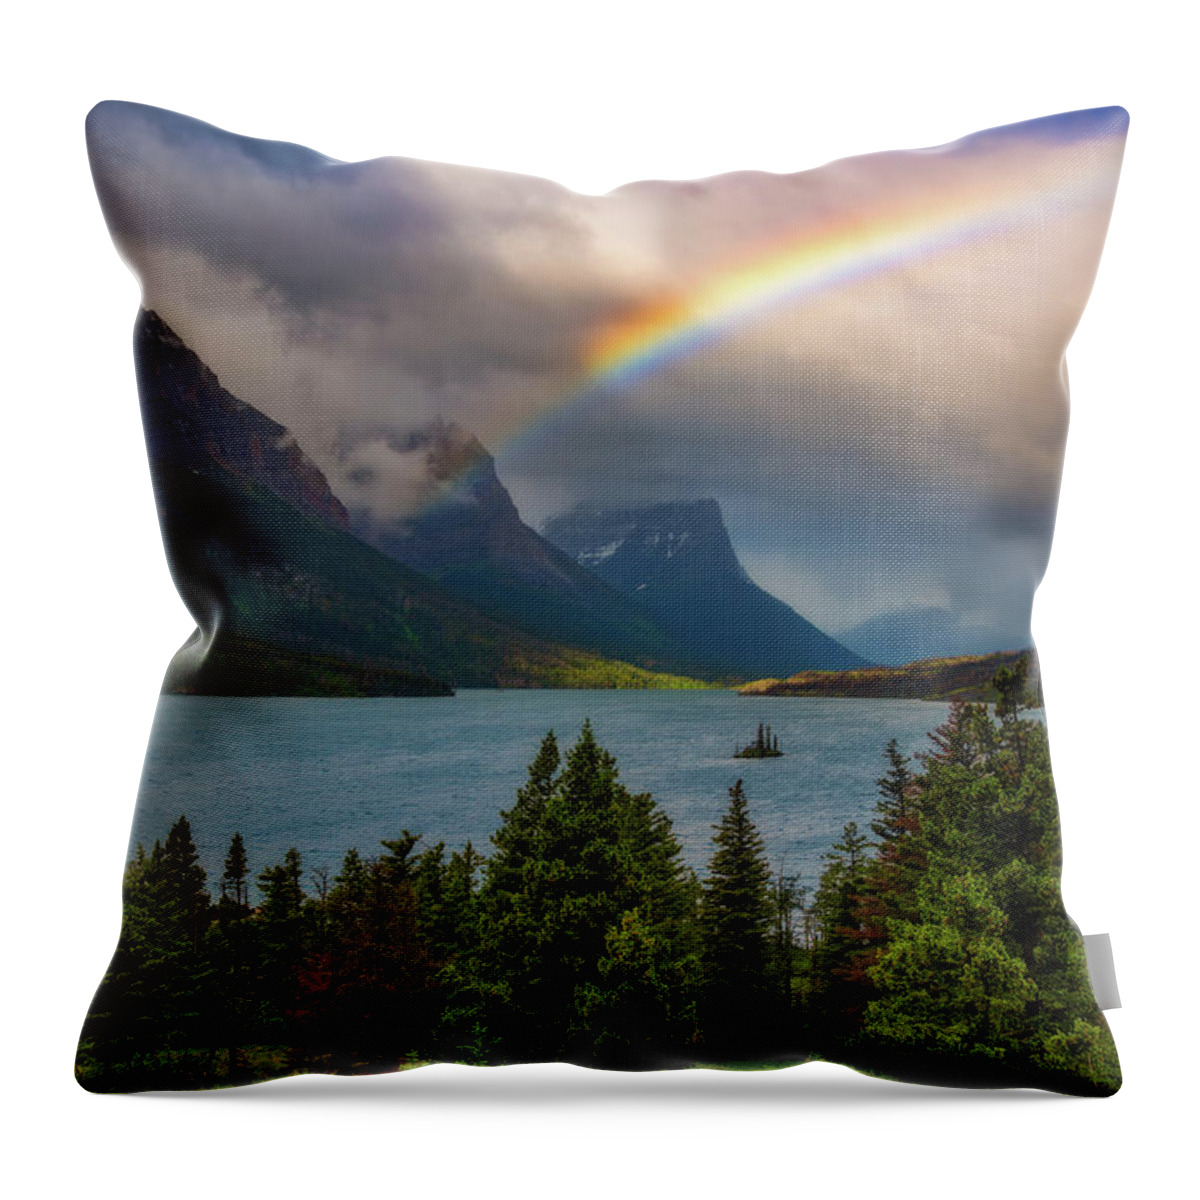 Rainbow Throw Pillow featuring the photograph Glacier Rainbow by Darren White